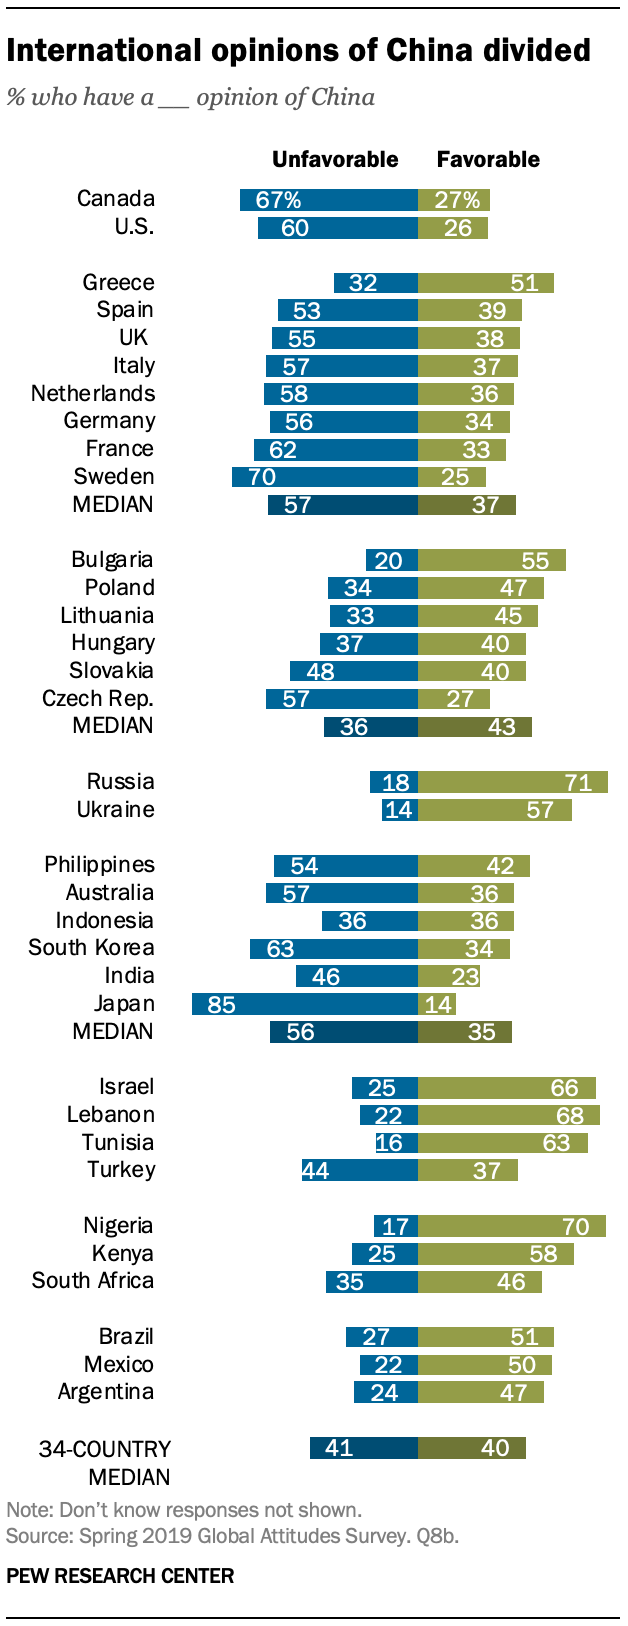 A chart showing international opinions of China divided